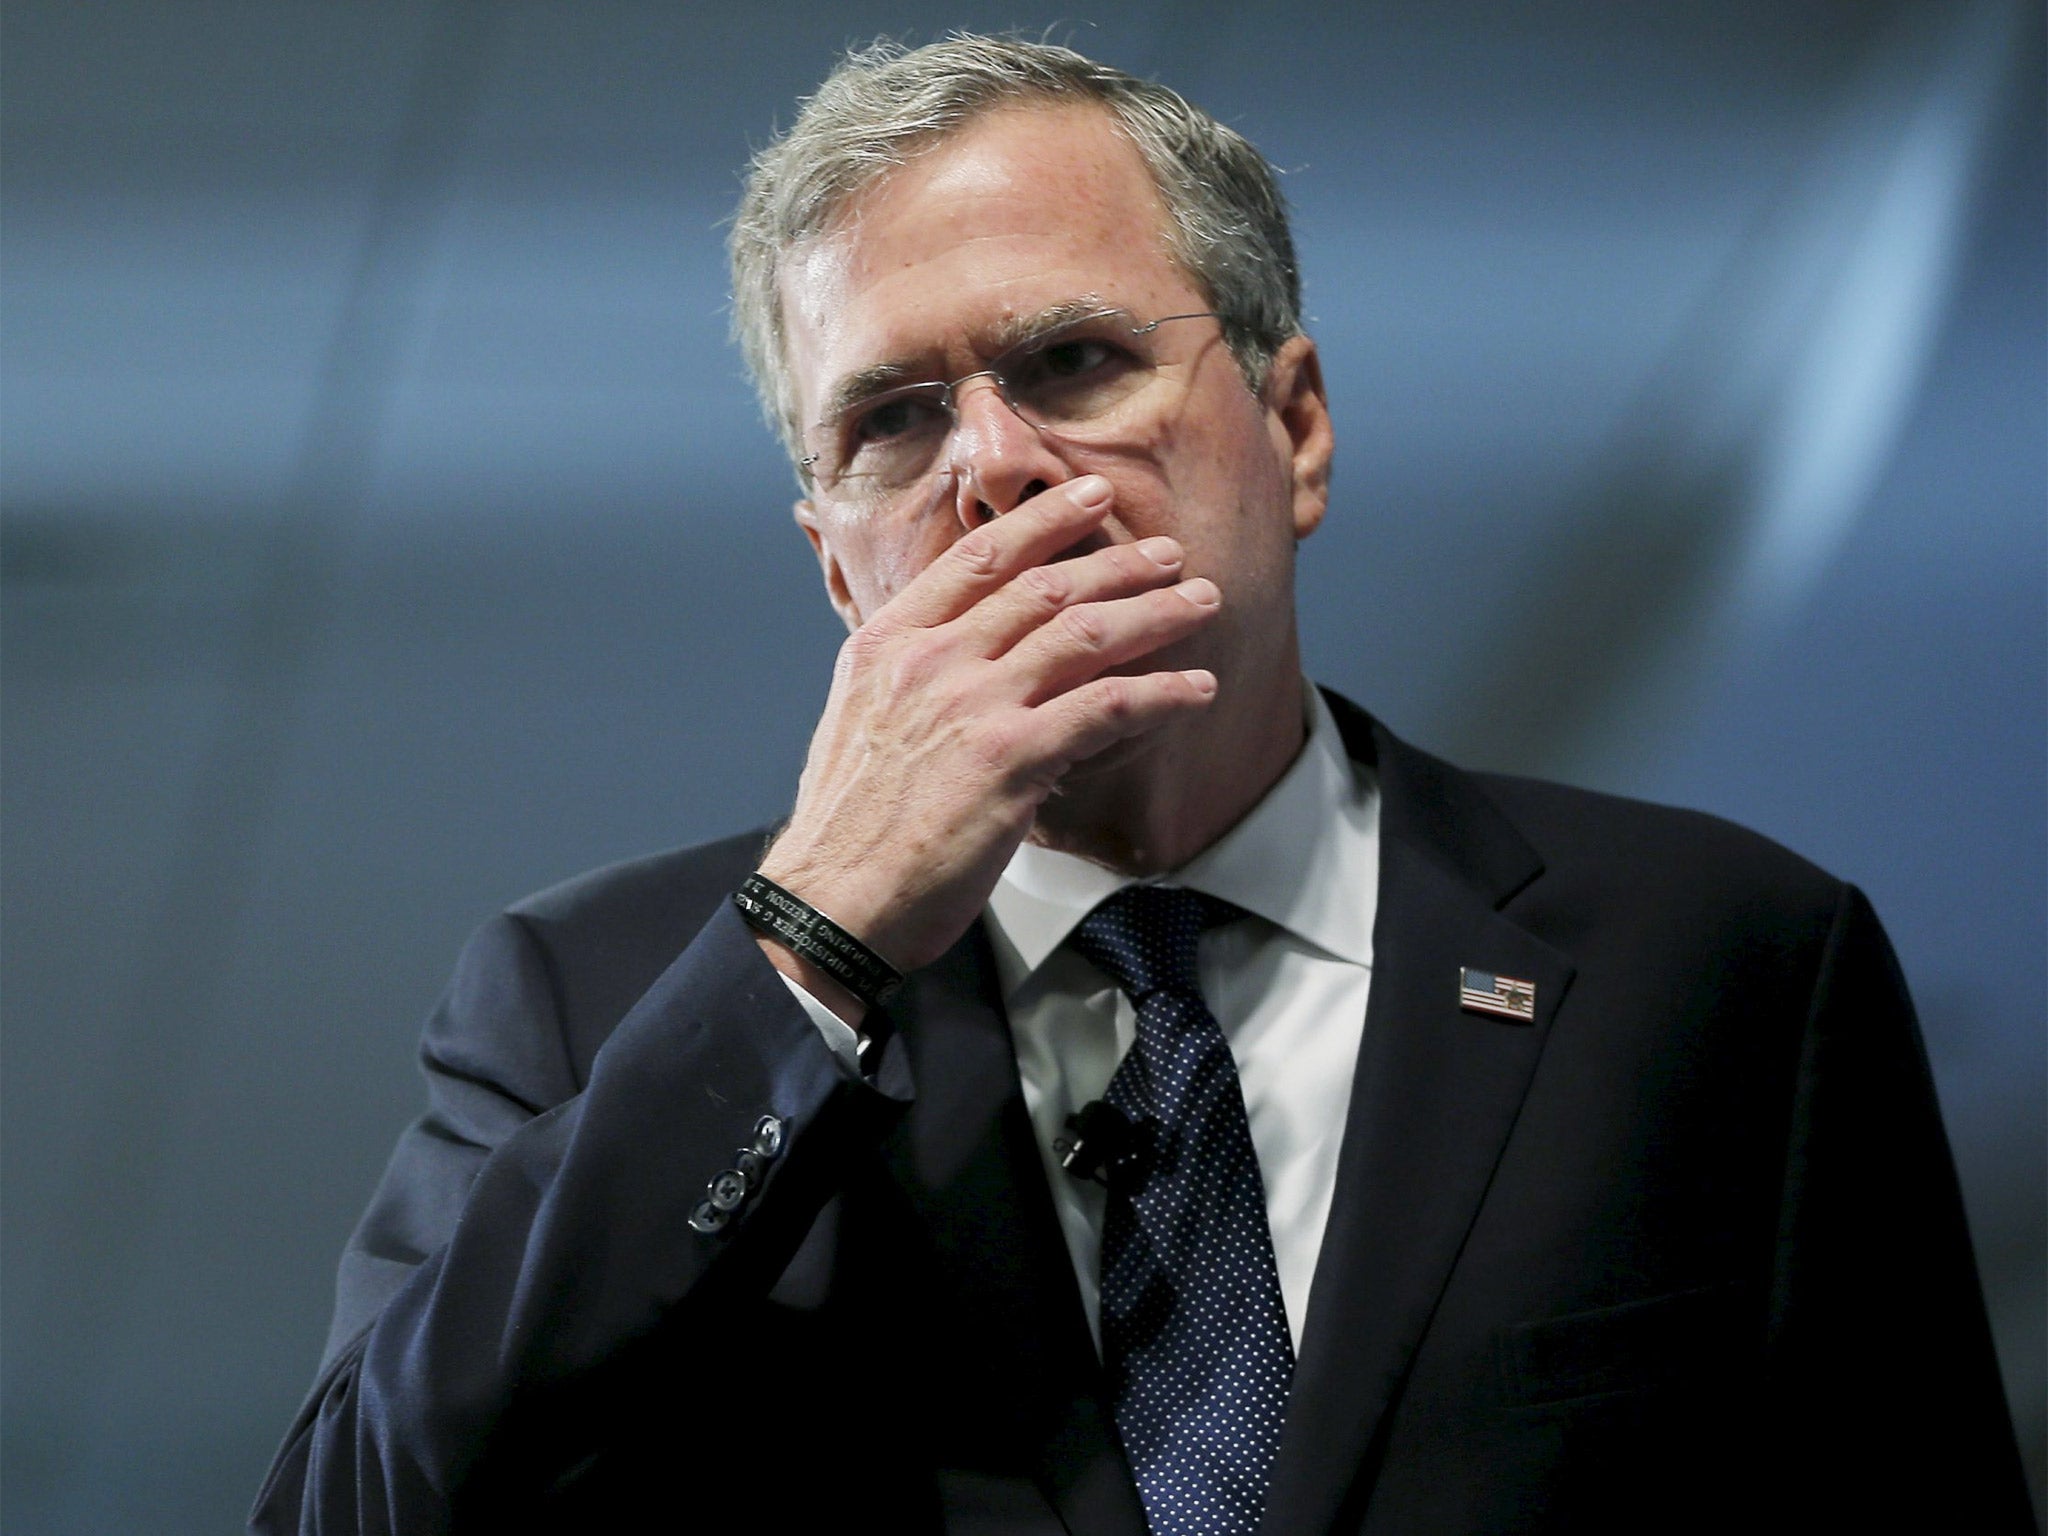 Jeb Bush pauses while speaking about his daughter at the New Hampshire forum on drug addiction